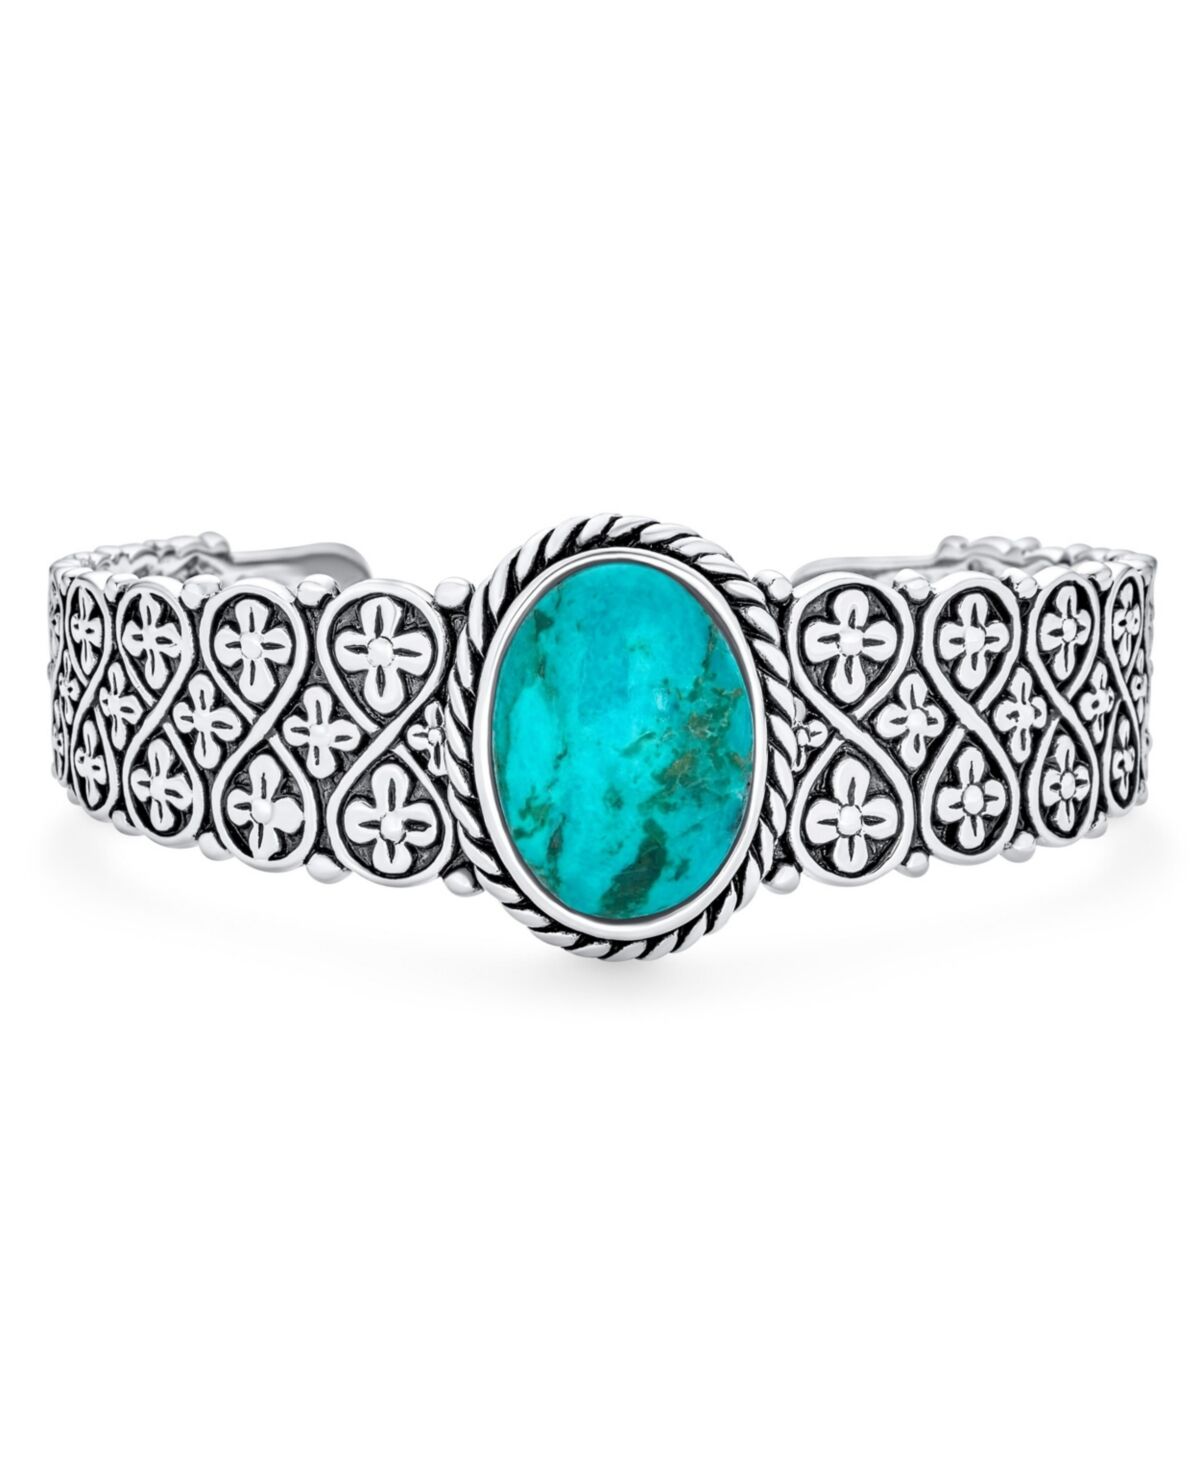 Bling Jewelry South Western Style Oval Cabochon Gemstone Flora Cross Infinity Lattice Turquoise Wide Cuff Bracelet For Women .925 Sterling Silver - Blue